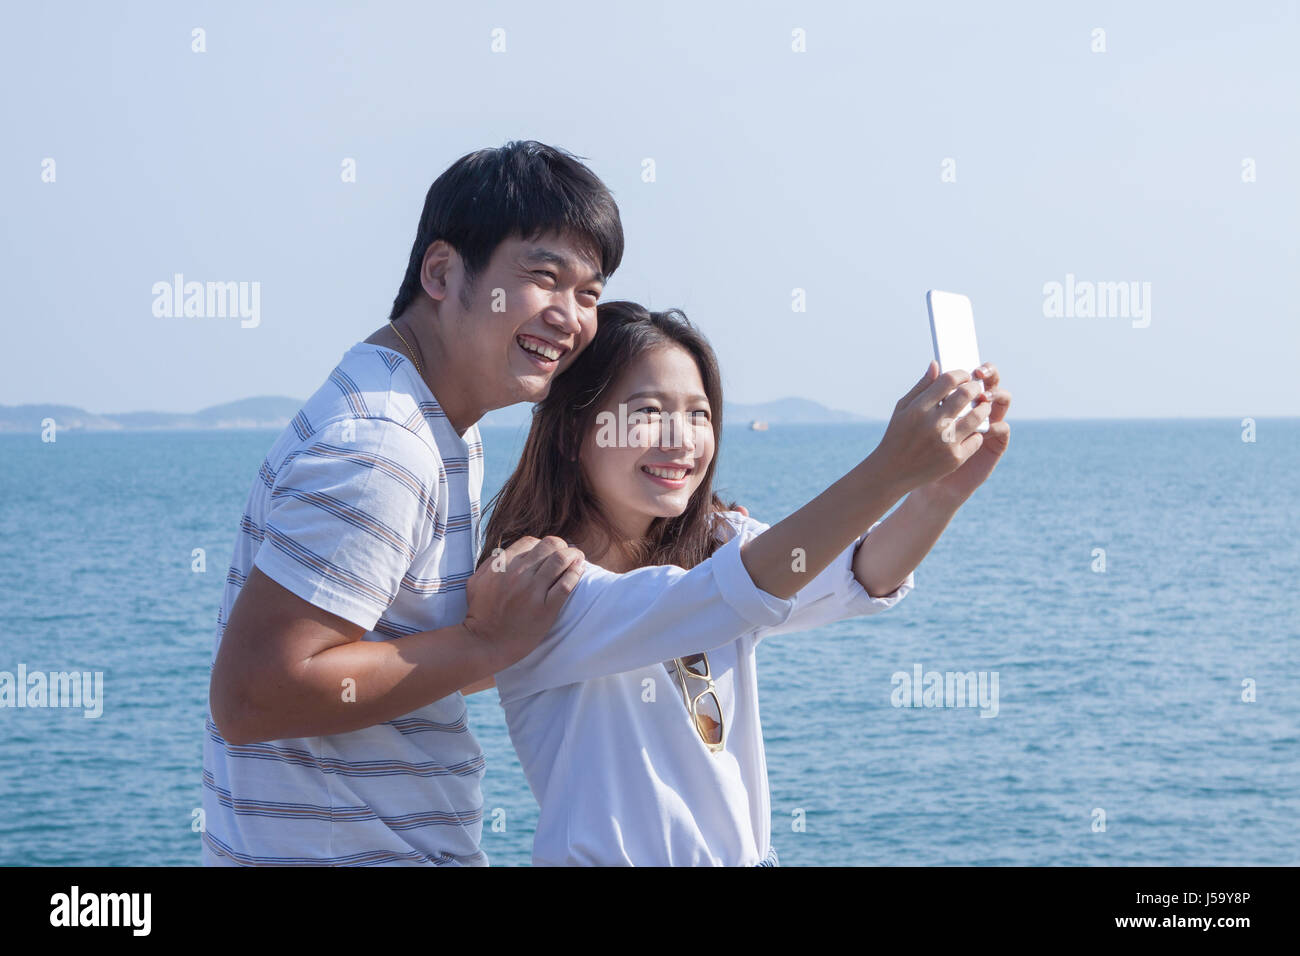 portrait of young man and woman selfie ,self portrait by mobile phone in relaxing emotion sea beach destination use for people in modern life style Stock Photo